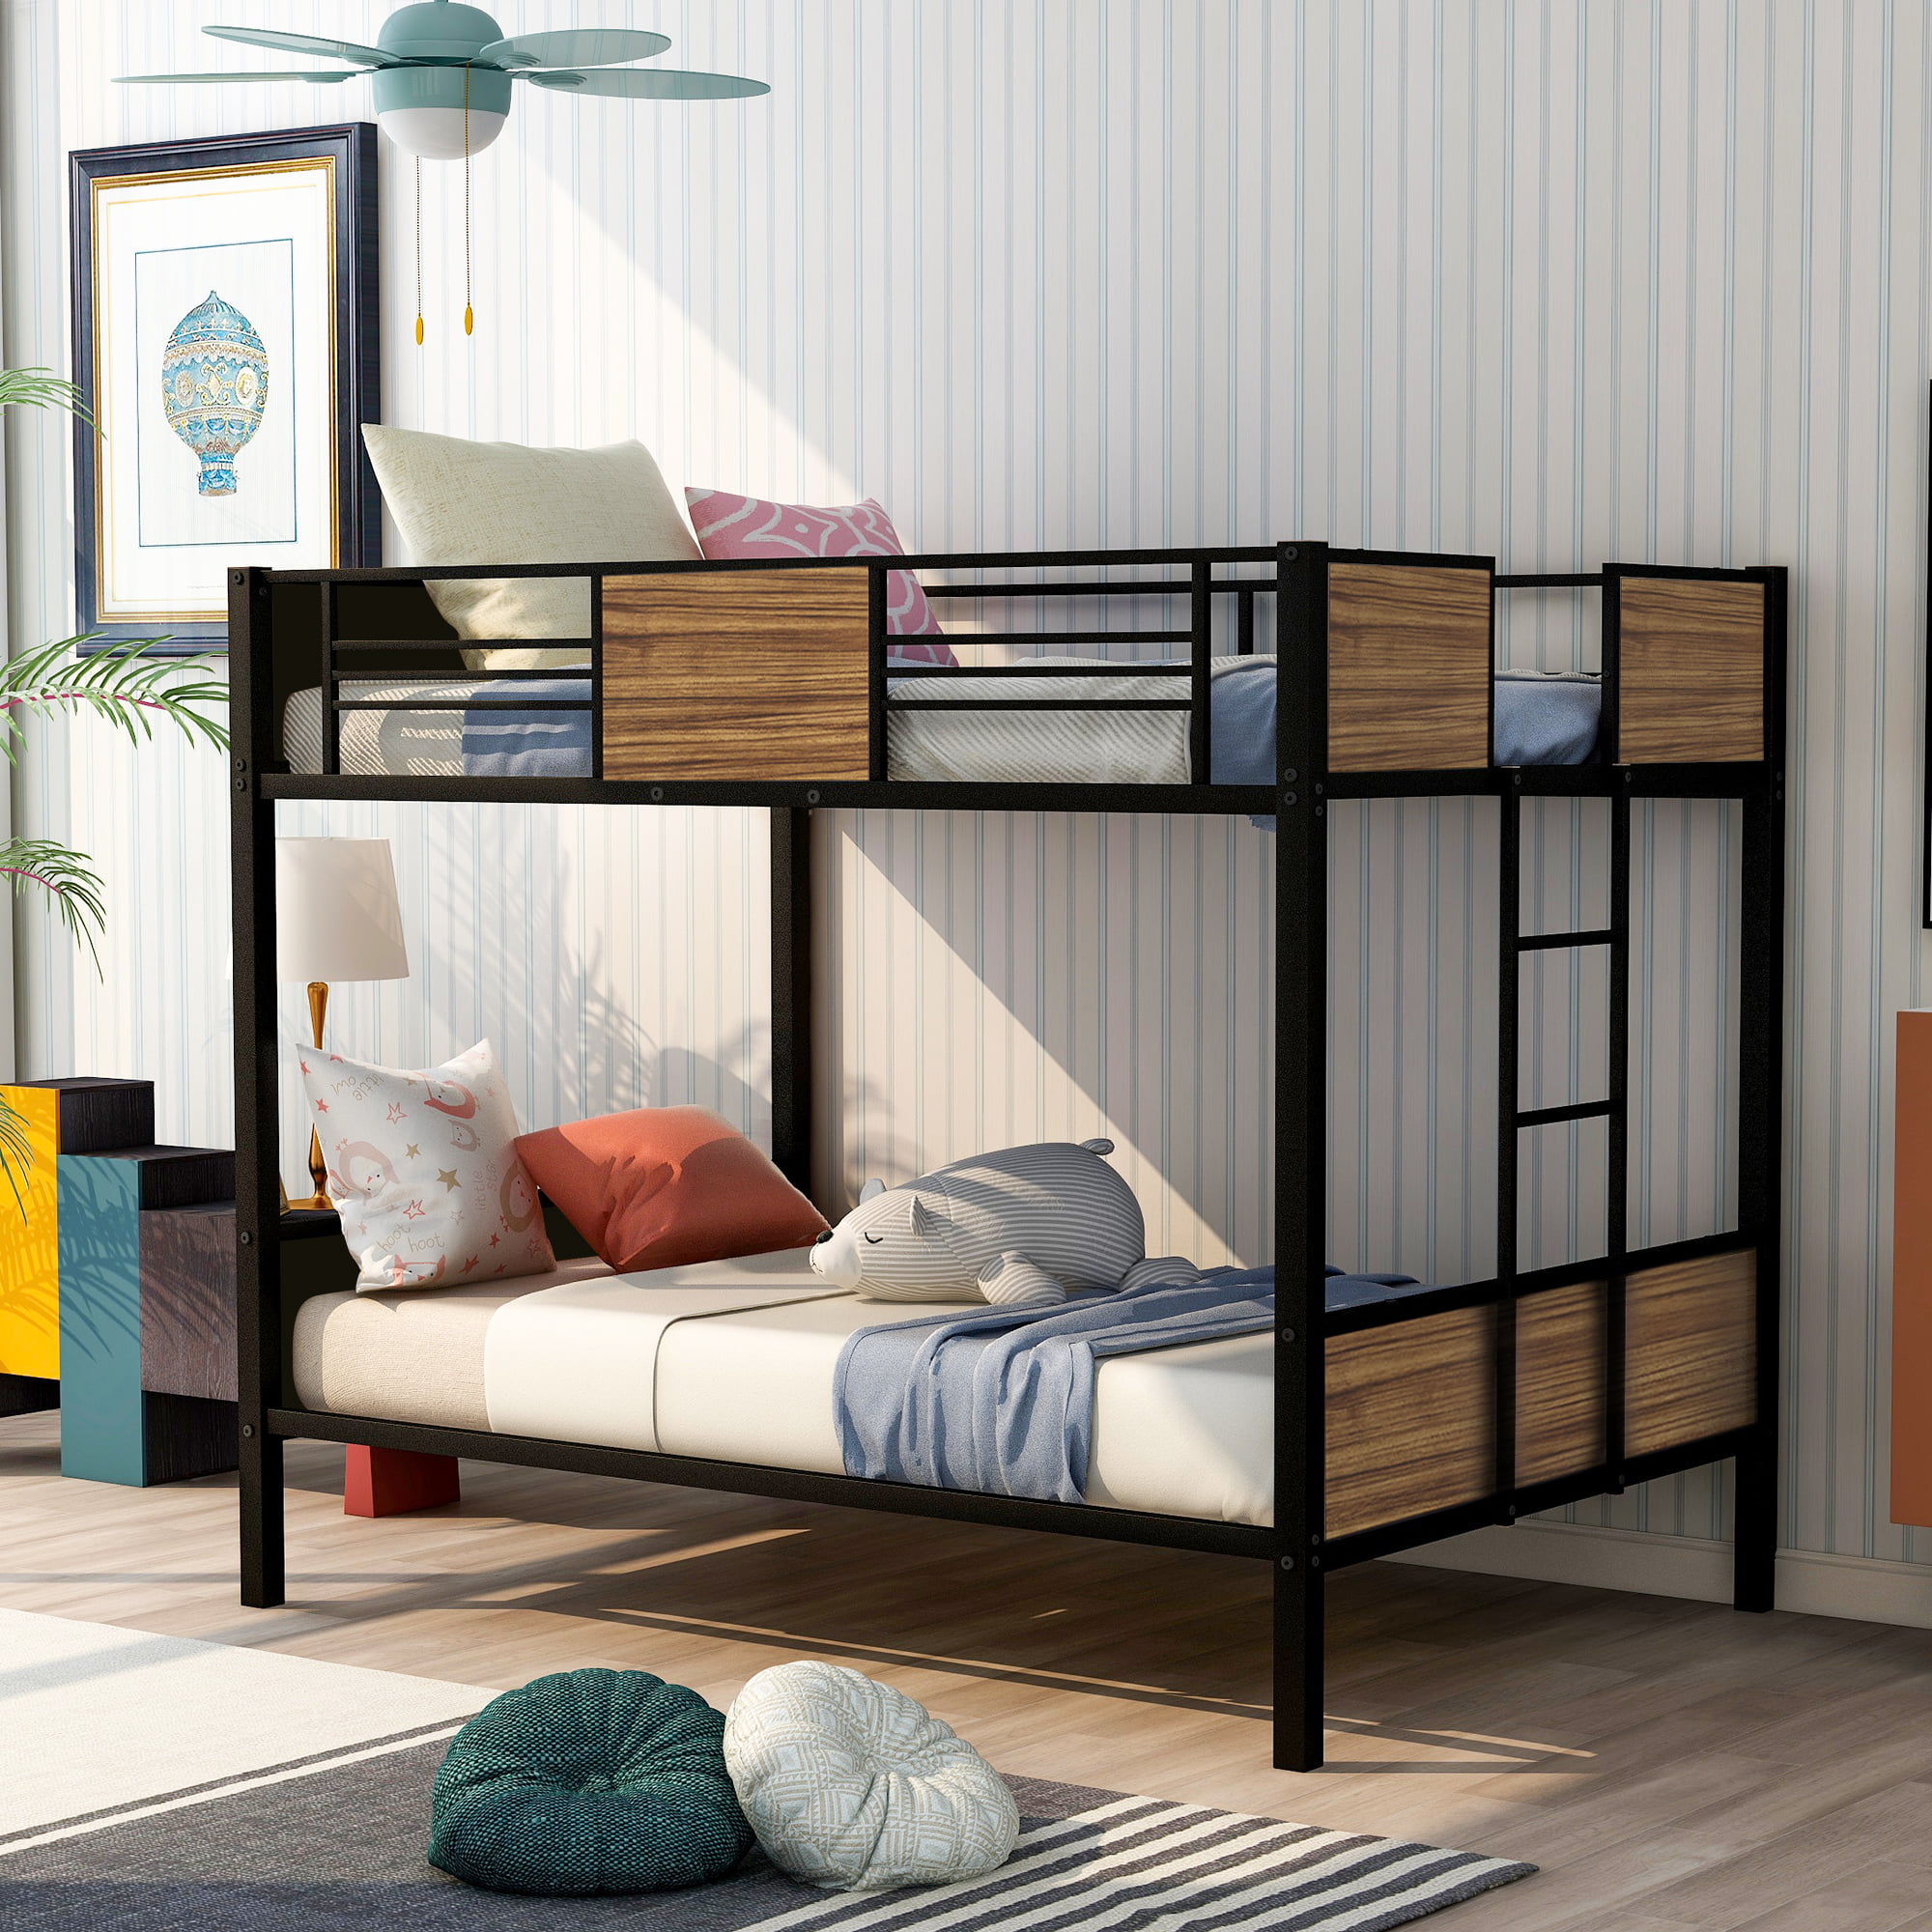 Full Over Bunk Bed Modern Style, Modern Style Bunk Beds